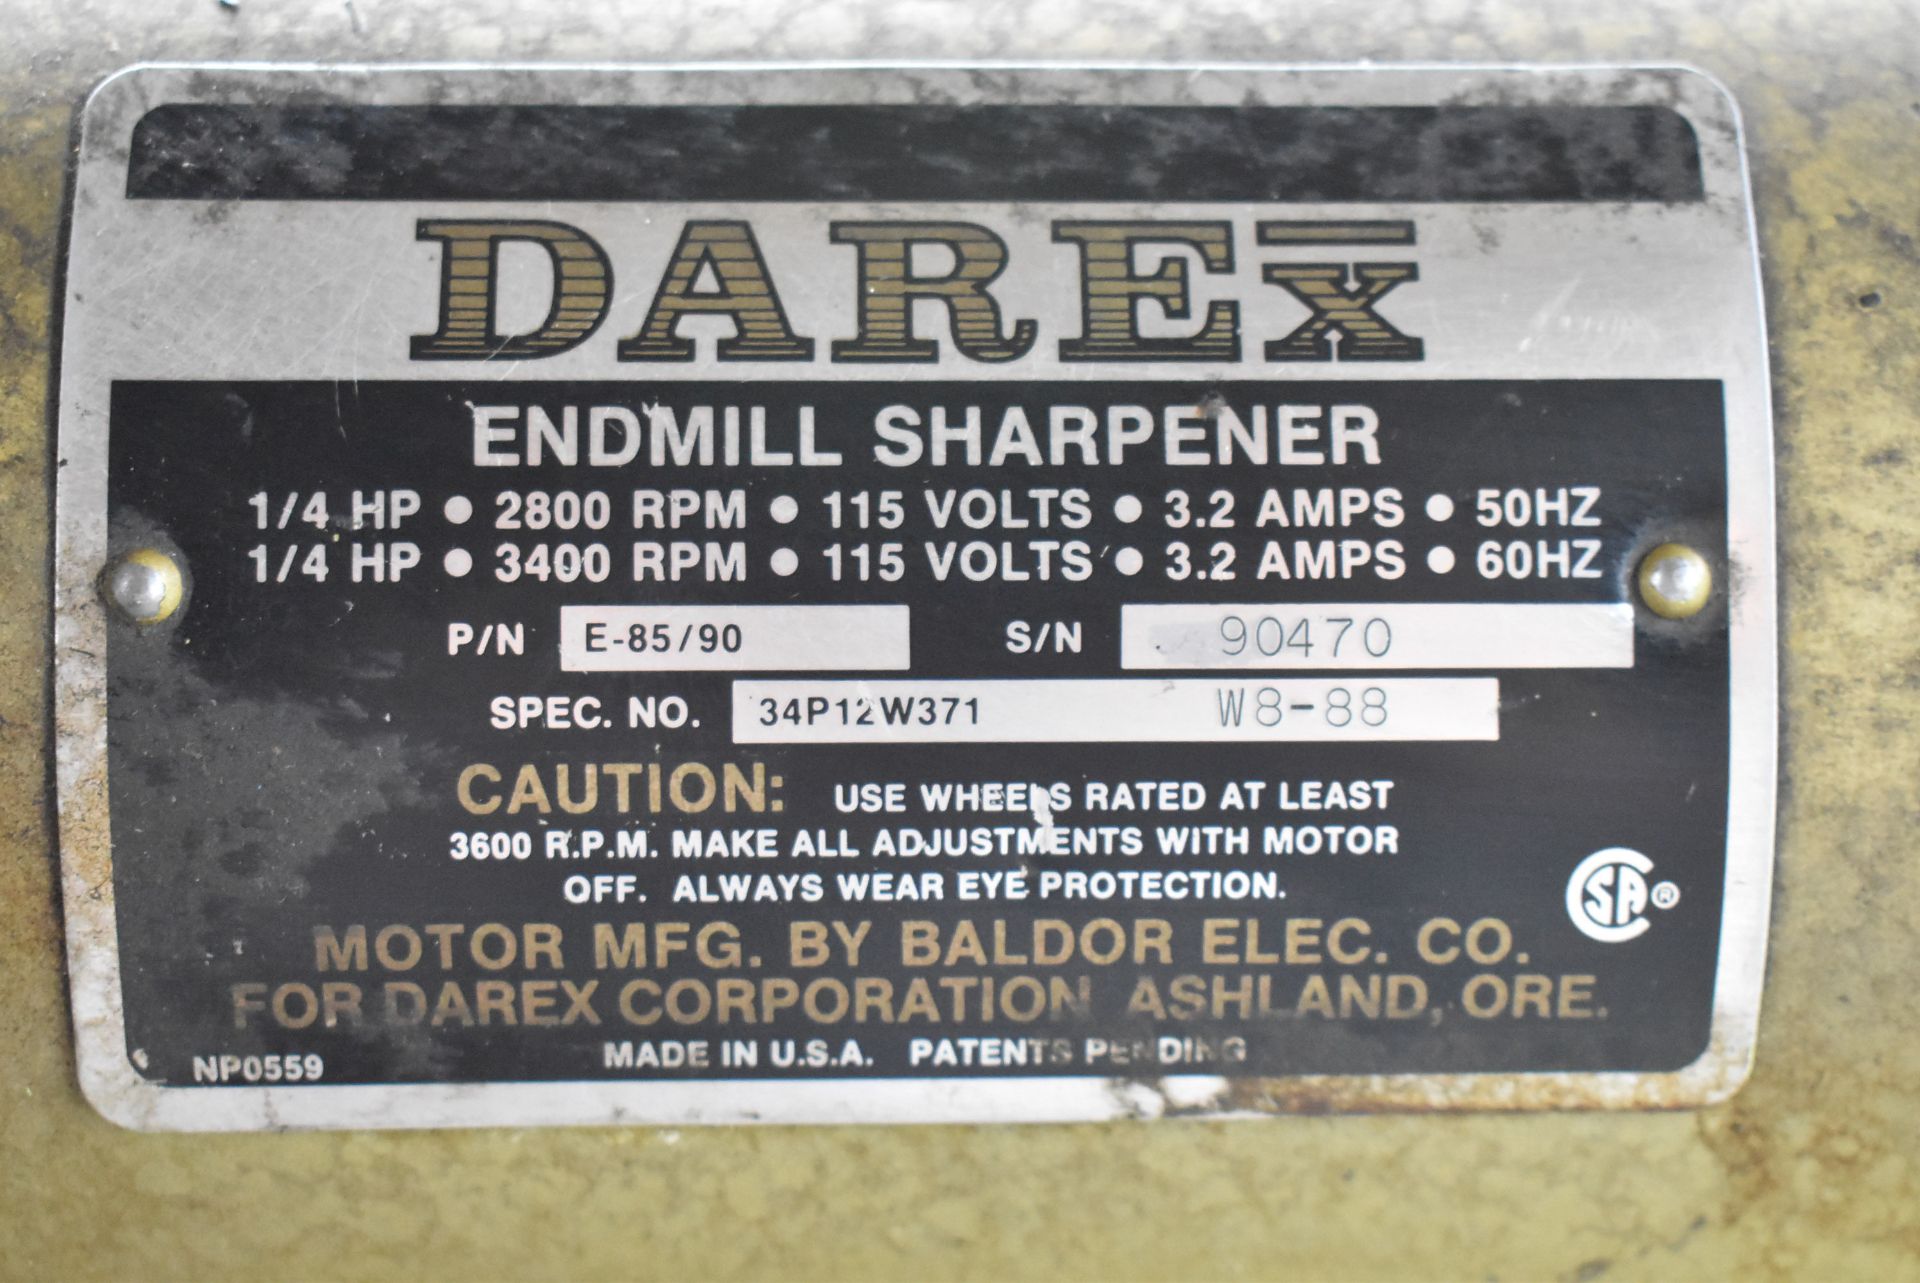 DAREX E-85/90 ENDMILL SHARPENER WITH 1/4 HP, 3400 RPM, S/N: 90470 - Image 4 of 4